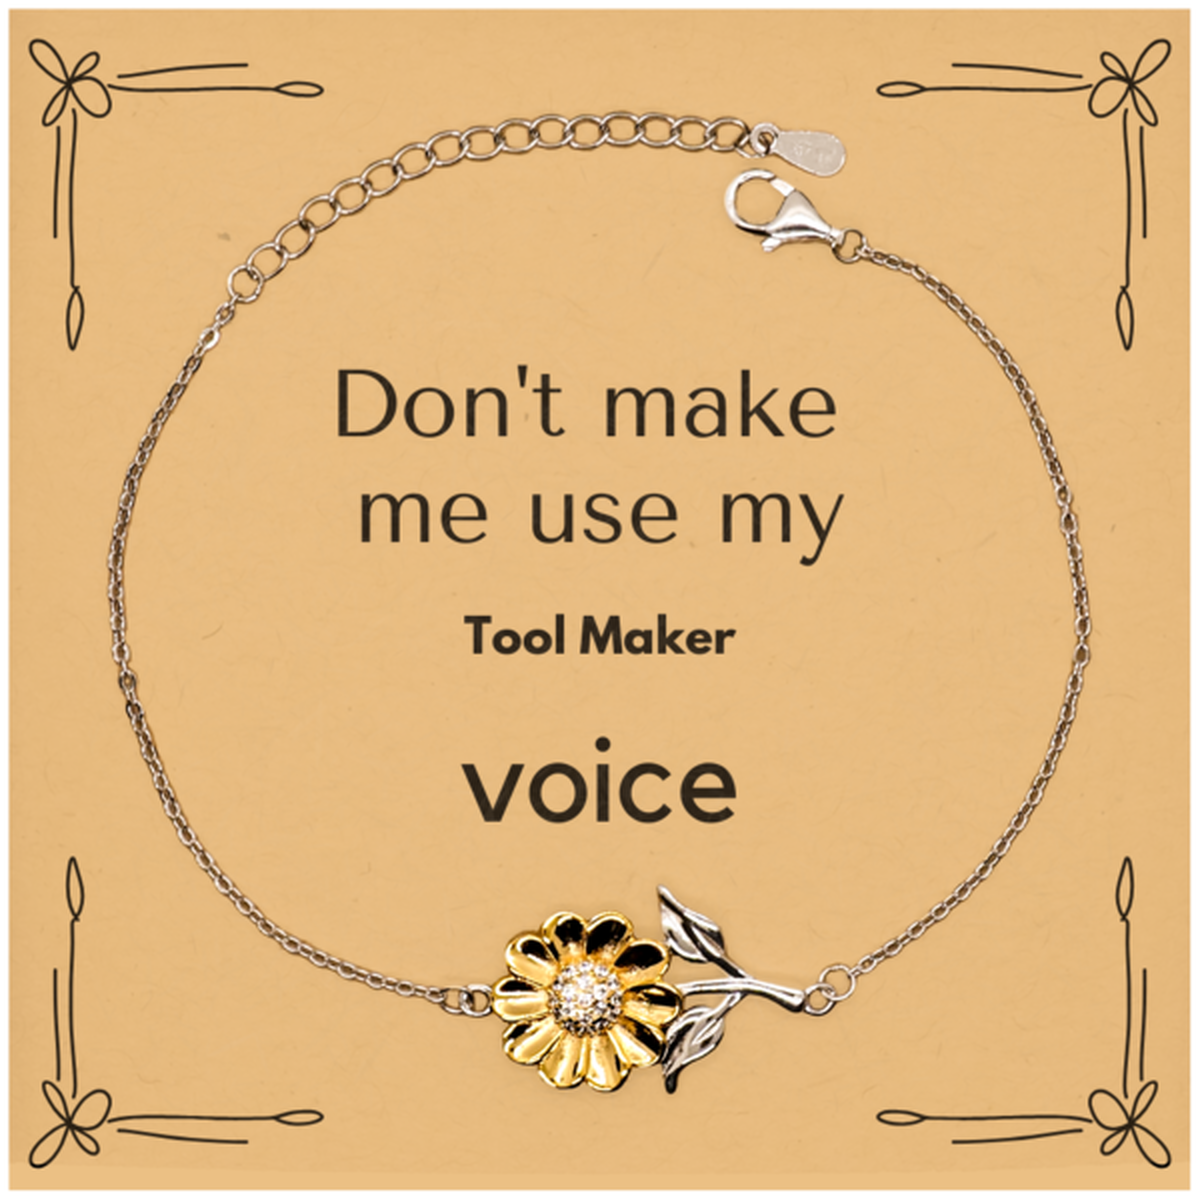 Don't make me use my Tool Maker voice, Sarcasm Tool Maker Card Gifts, Christmas Tool Maker Sunflower Bracelet Birthday Unique Gifts For Tool Maker Coworkers, Men, Women, Colleague, Friends